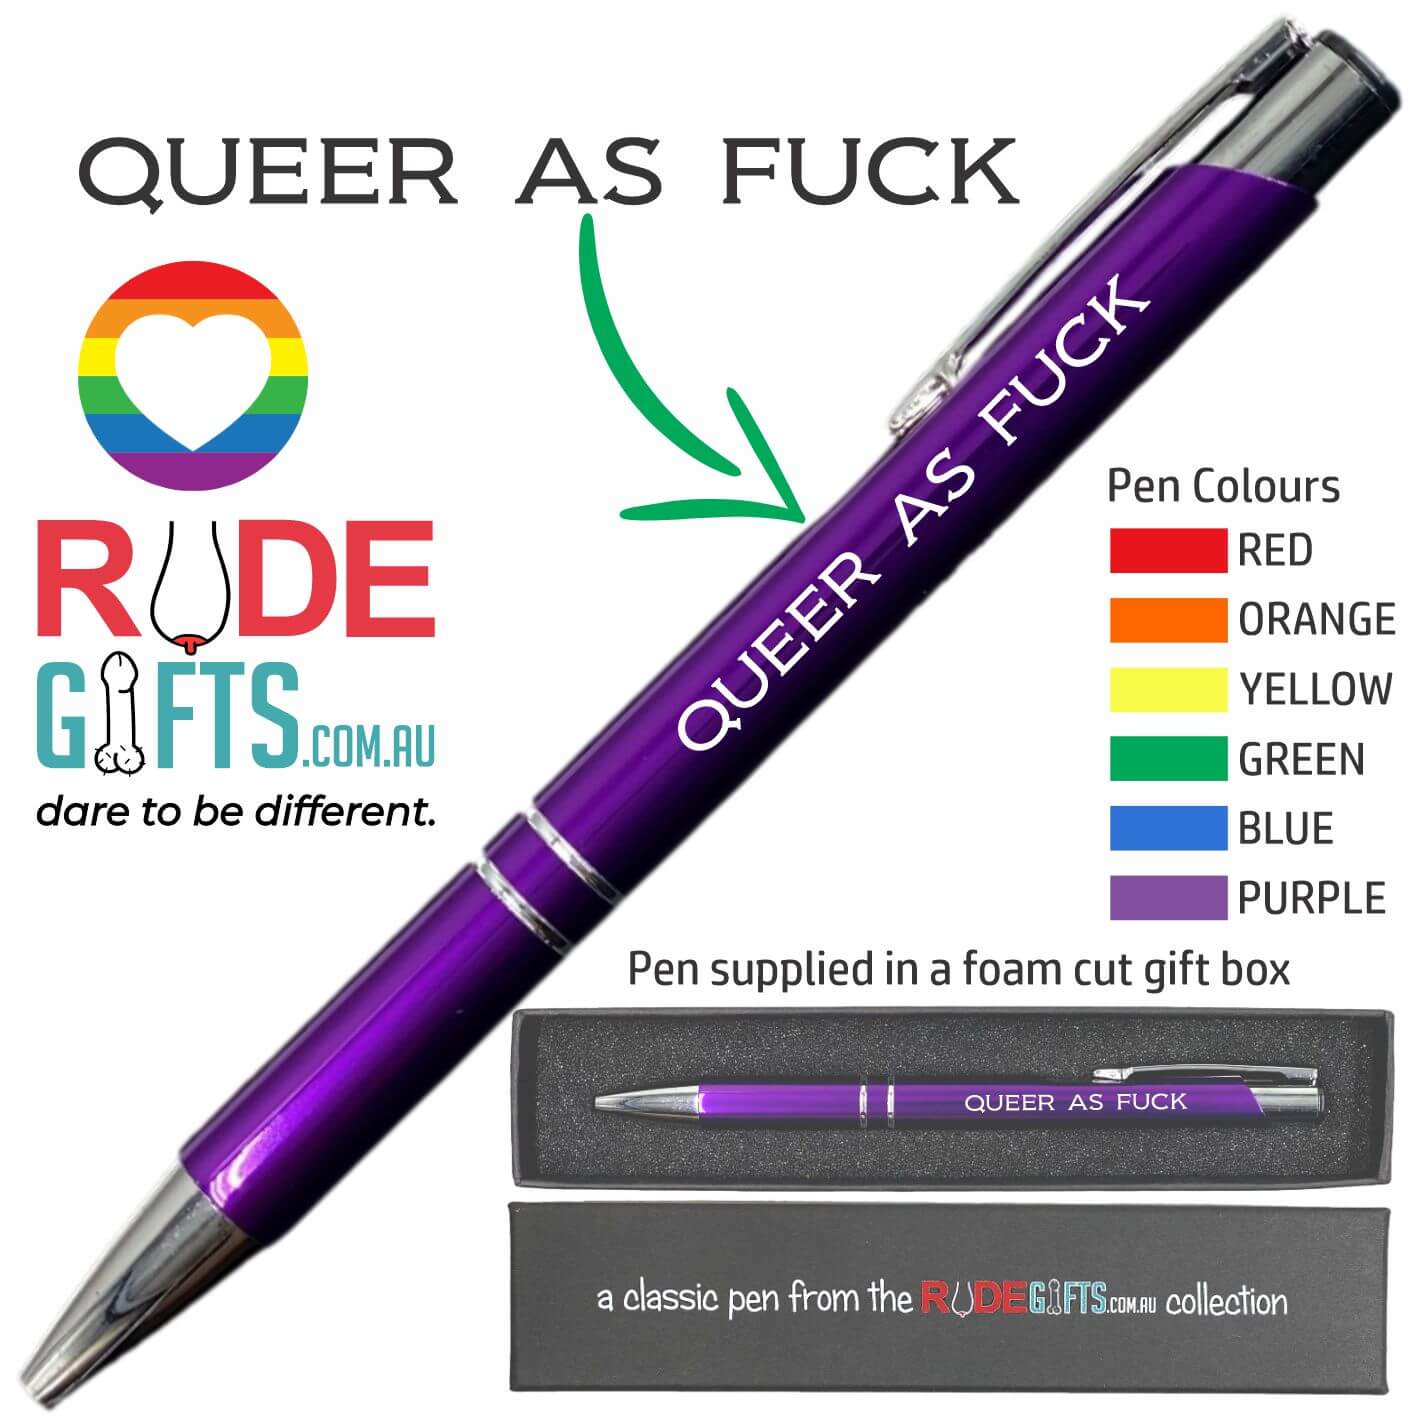 Queer as fuck